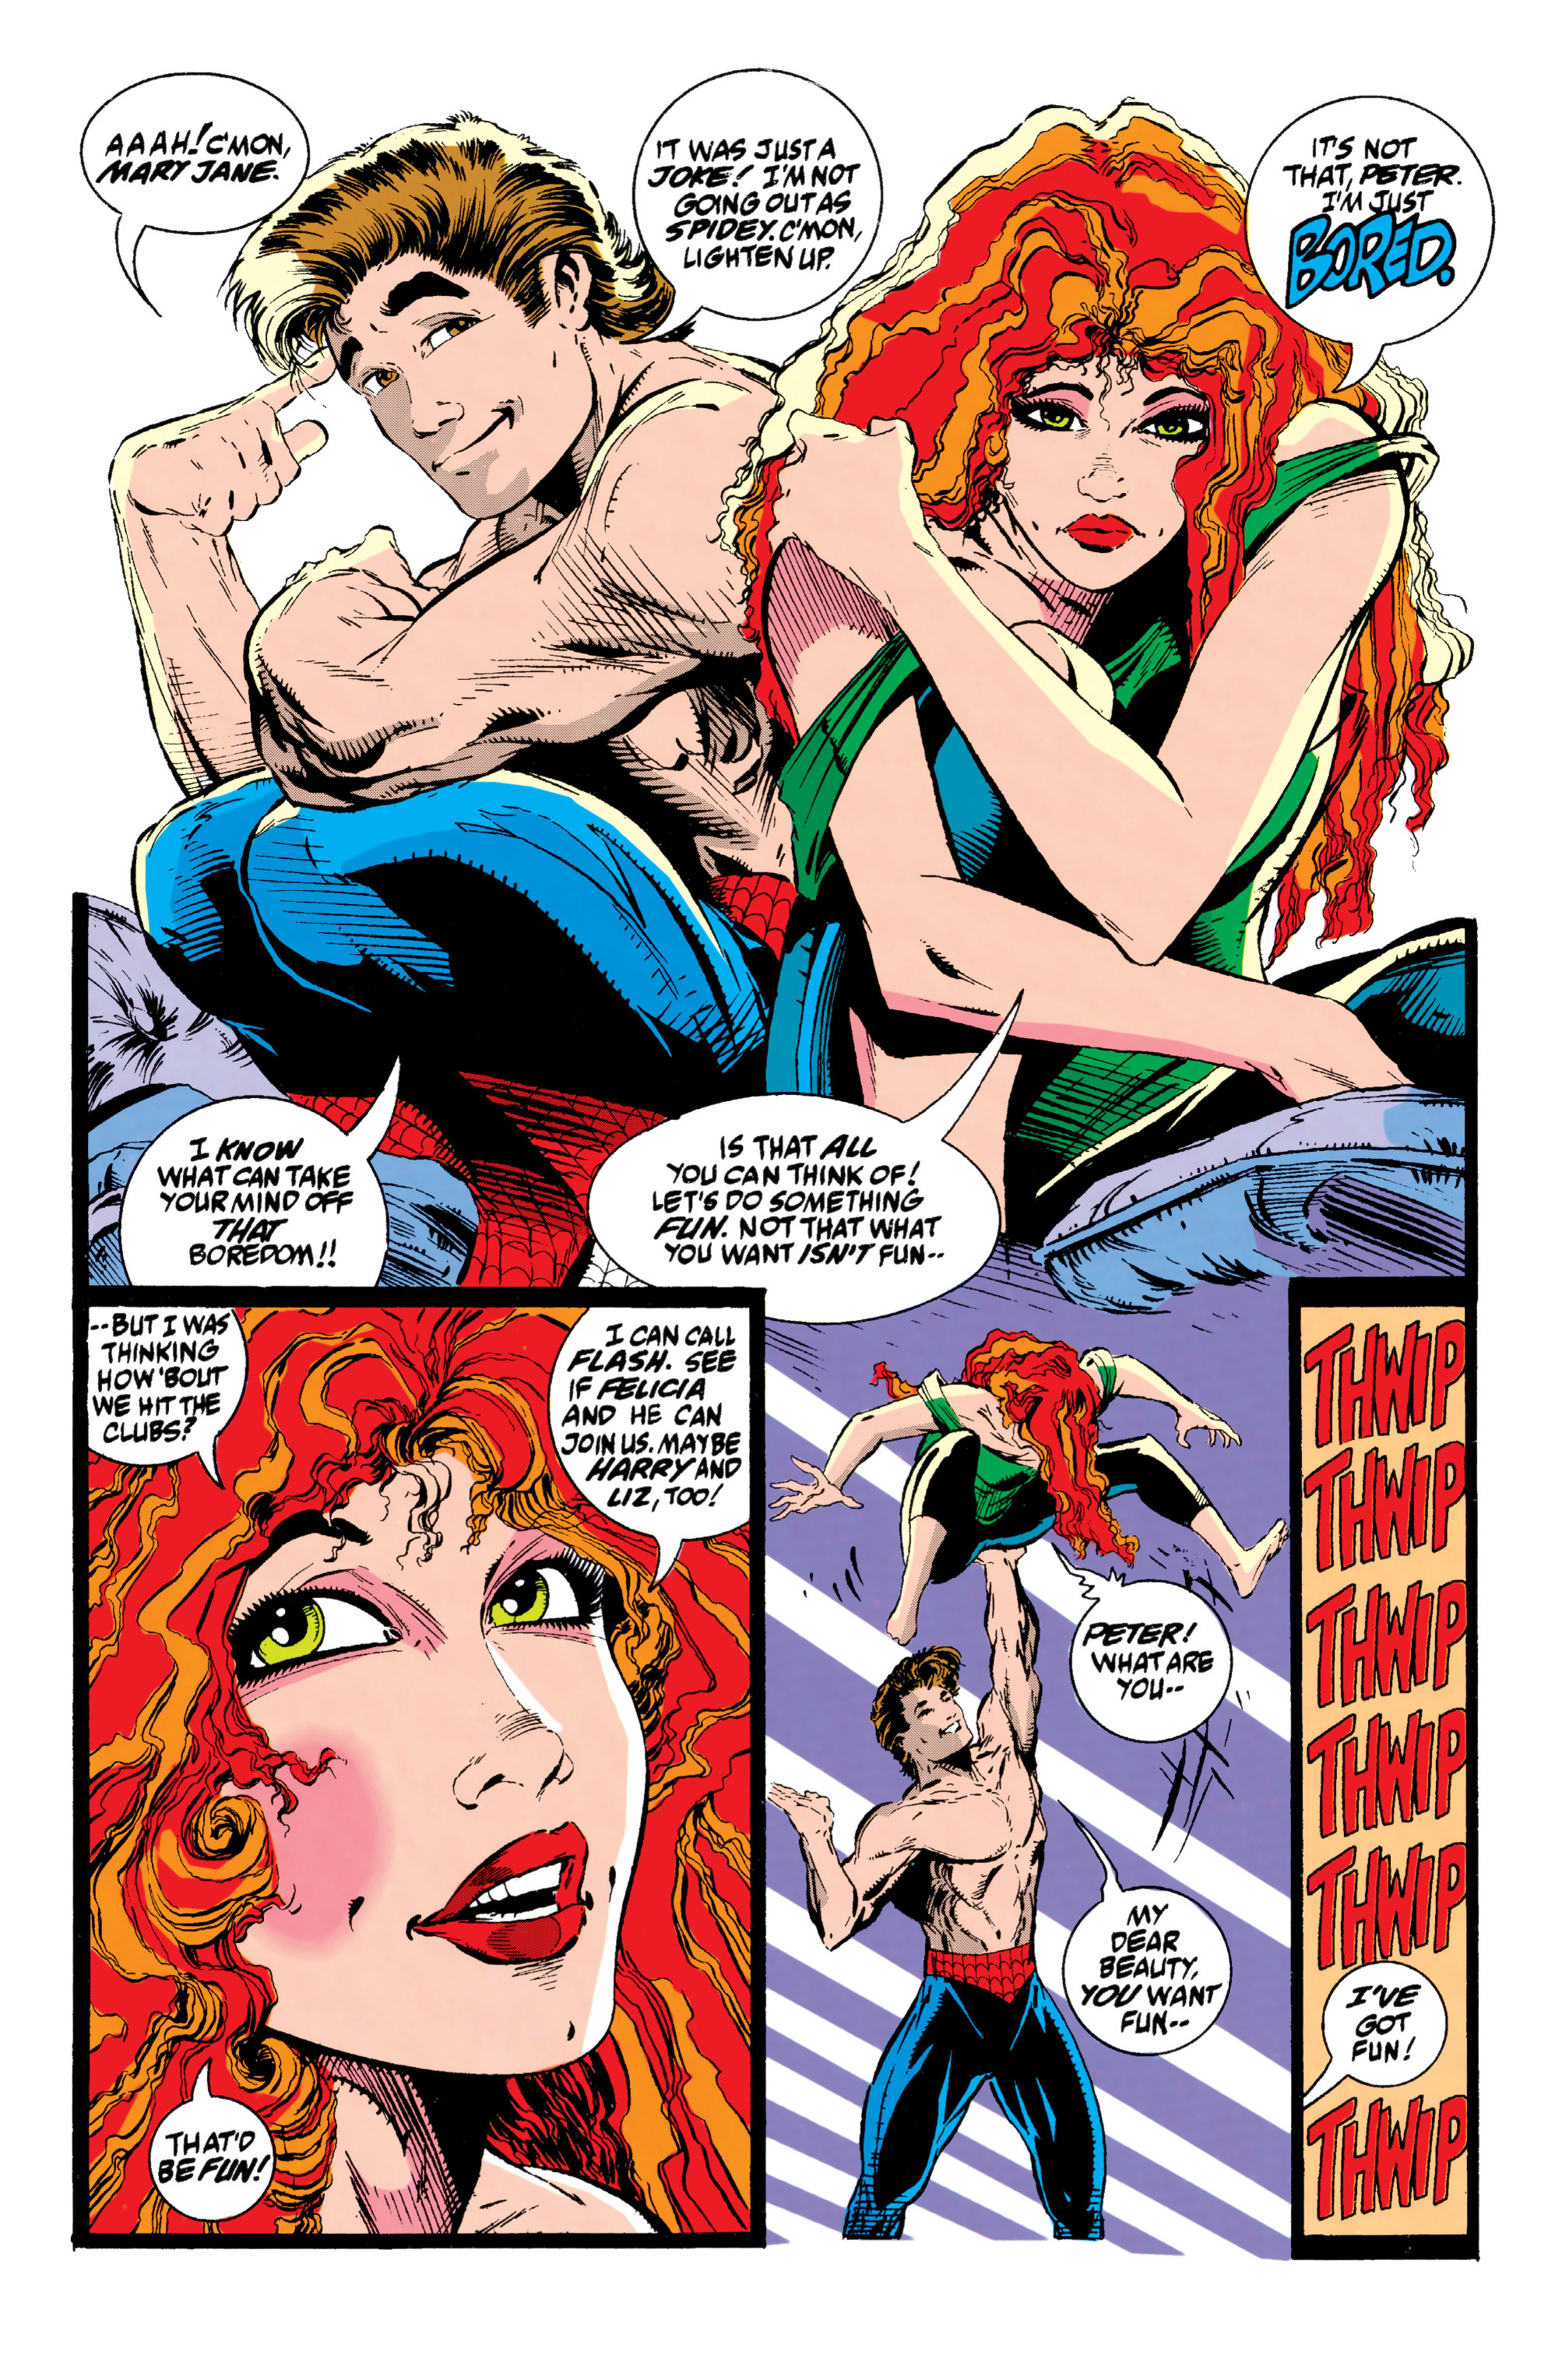 Spider-Man (1990) 13_-_Sub_City_Part_1_of_2 Page 4